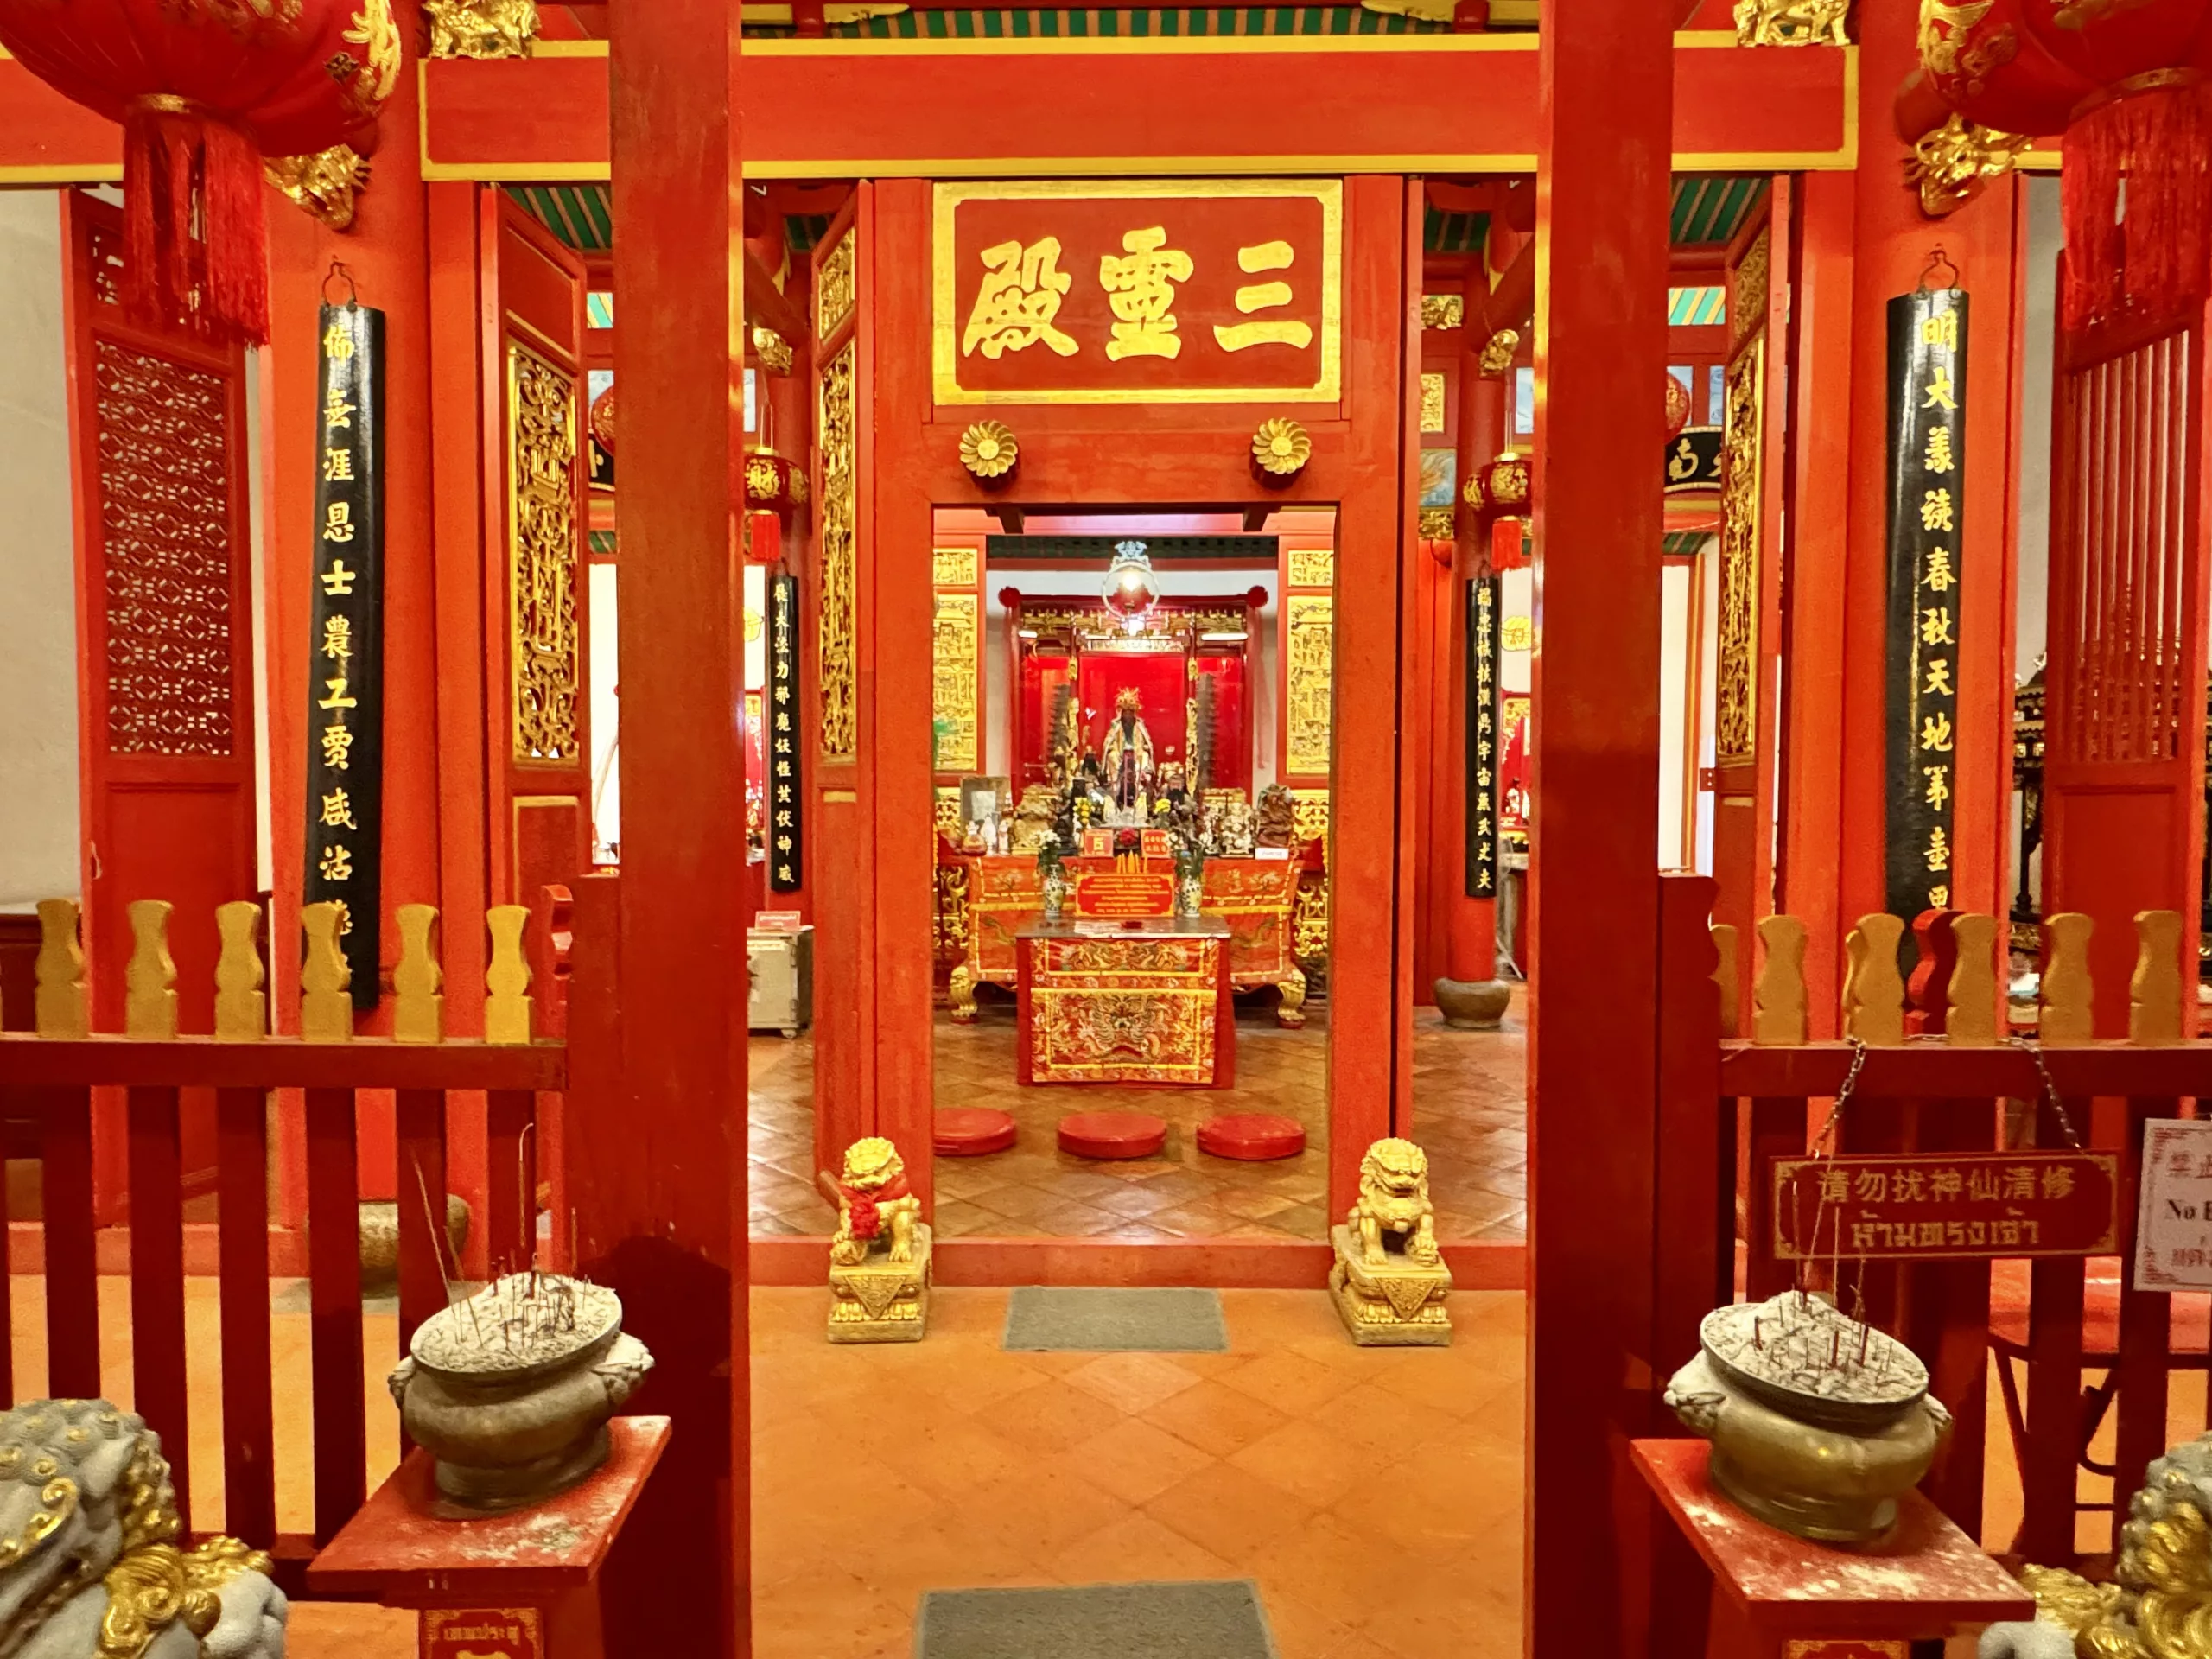 Chinese Temple, Songkhla, Thailand